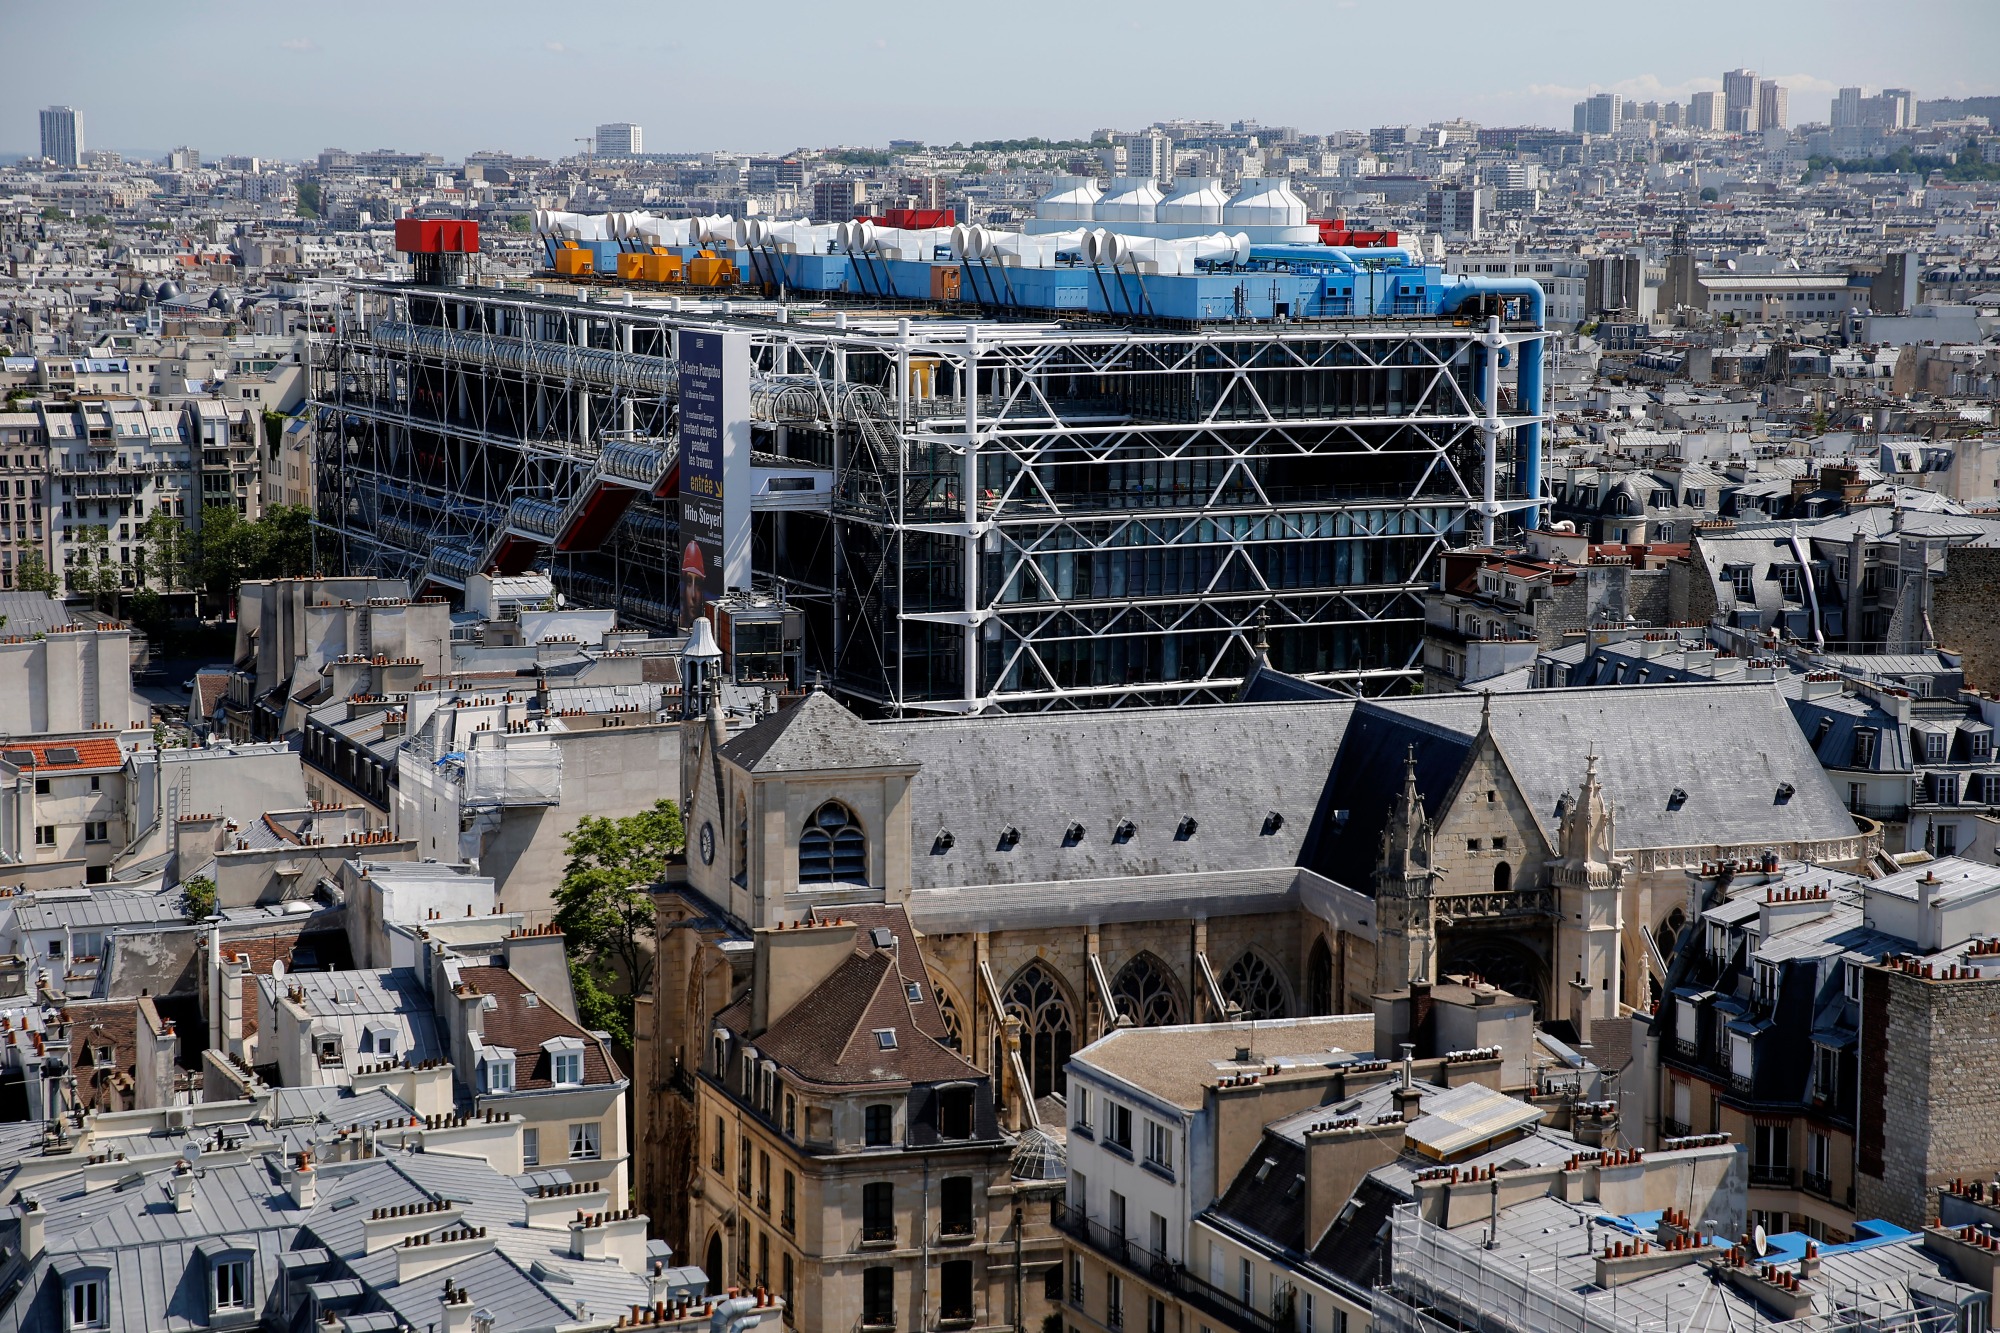 PARIS, FRANCE - JUNE 07: The Georges Pompidou National Center for Art and Culture, commonly known as the Centre Pompidou, or more colloquially, as "Beaubourg" is seen from the zinc-topped terrace of the Saint-Jacques Tower (Tour Saint-Jacques) on June 7, 2021, in Paris. The Saint-Jacques Tower reopens to the public after being closed due to COVID. From May to November, the UNESCO World Heritage site offers visitors who ascend the 52-meter tower and 300-step spiral staircase a breathtaking 360-degree view of the French capital. This flamboyant 16th-century Gothic tower, a passageway for pilgrims to Santiago de Compostela in Spain, has been closed to the public for most of its 500-year history. (Photo Chesnot/Getty Images)